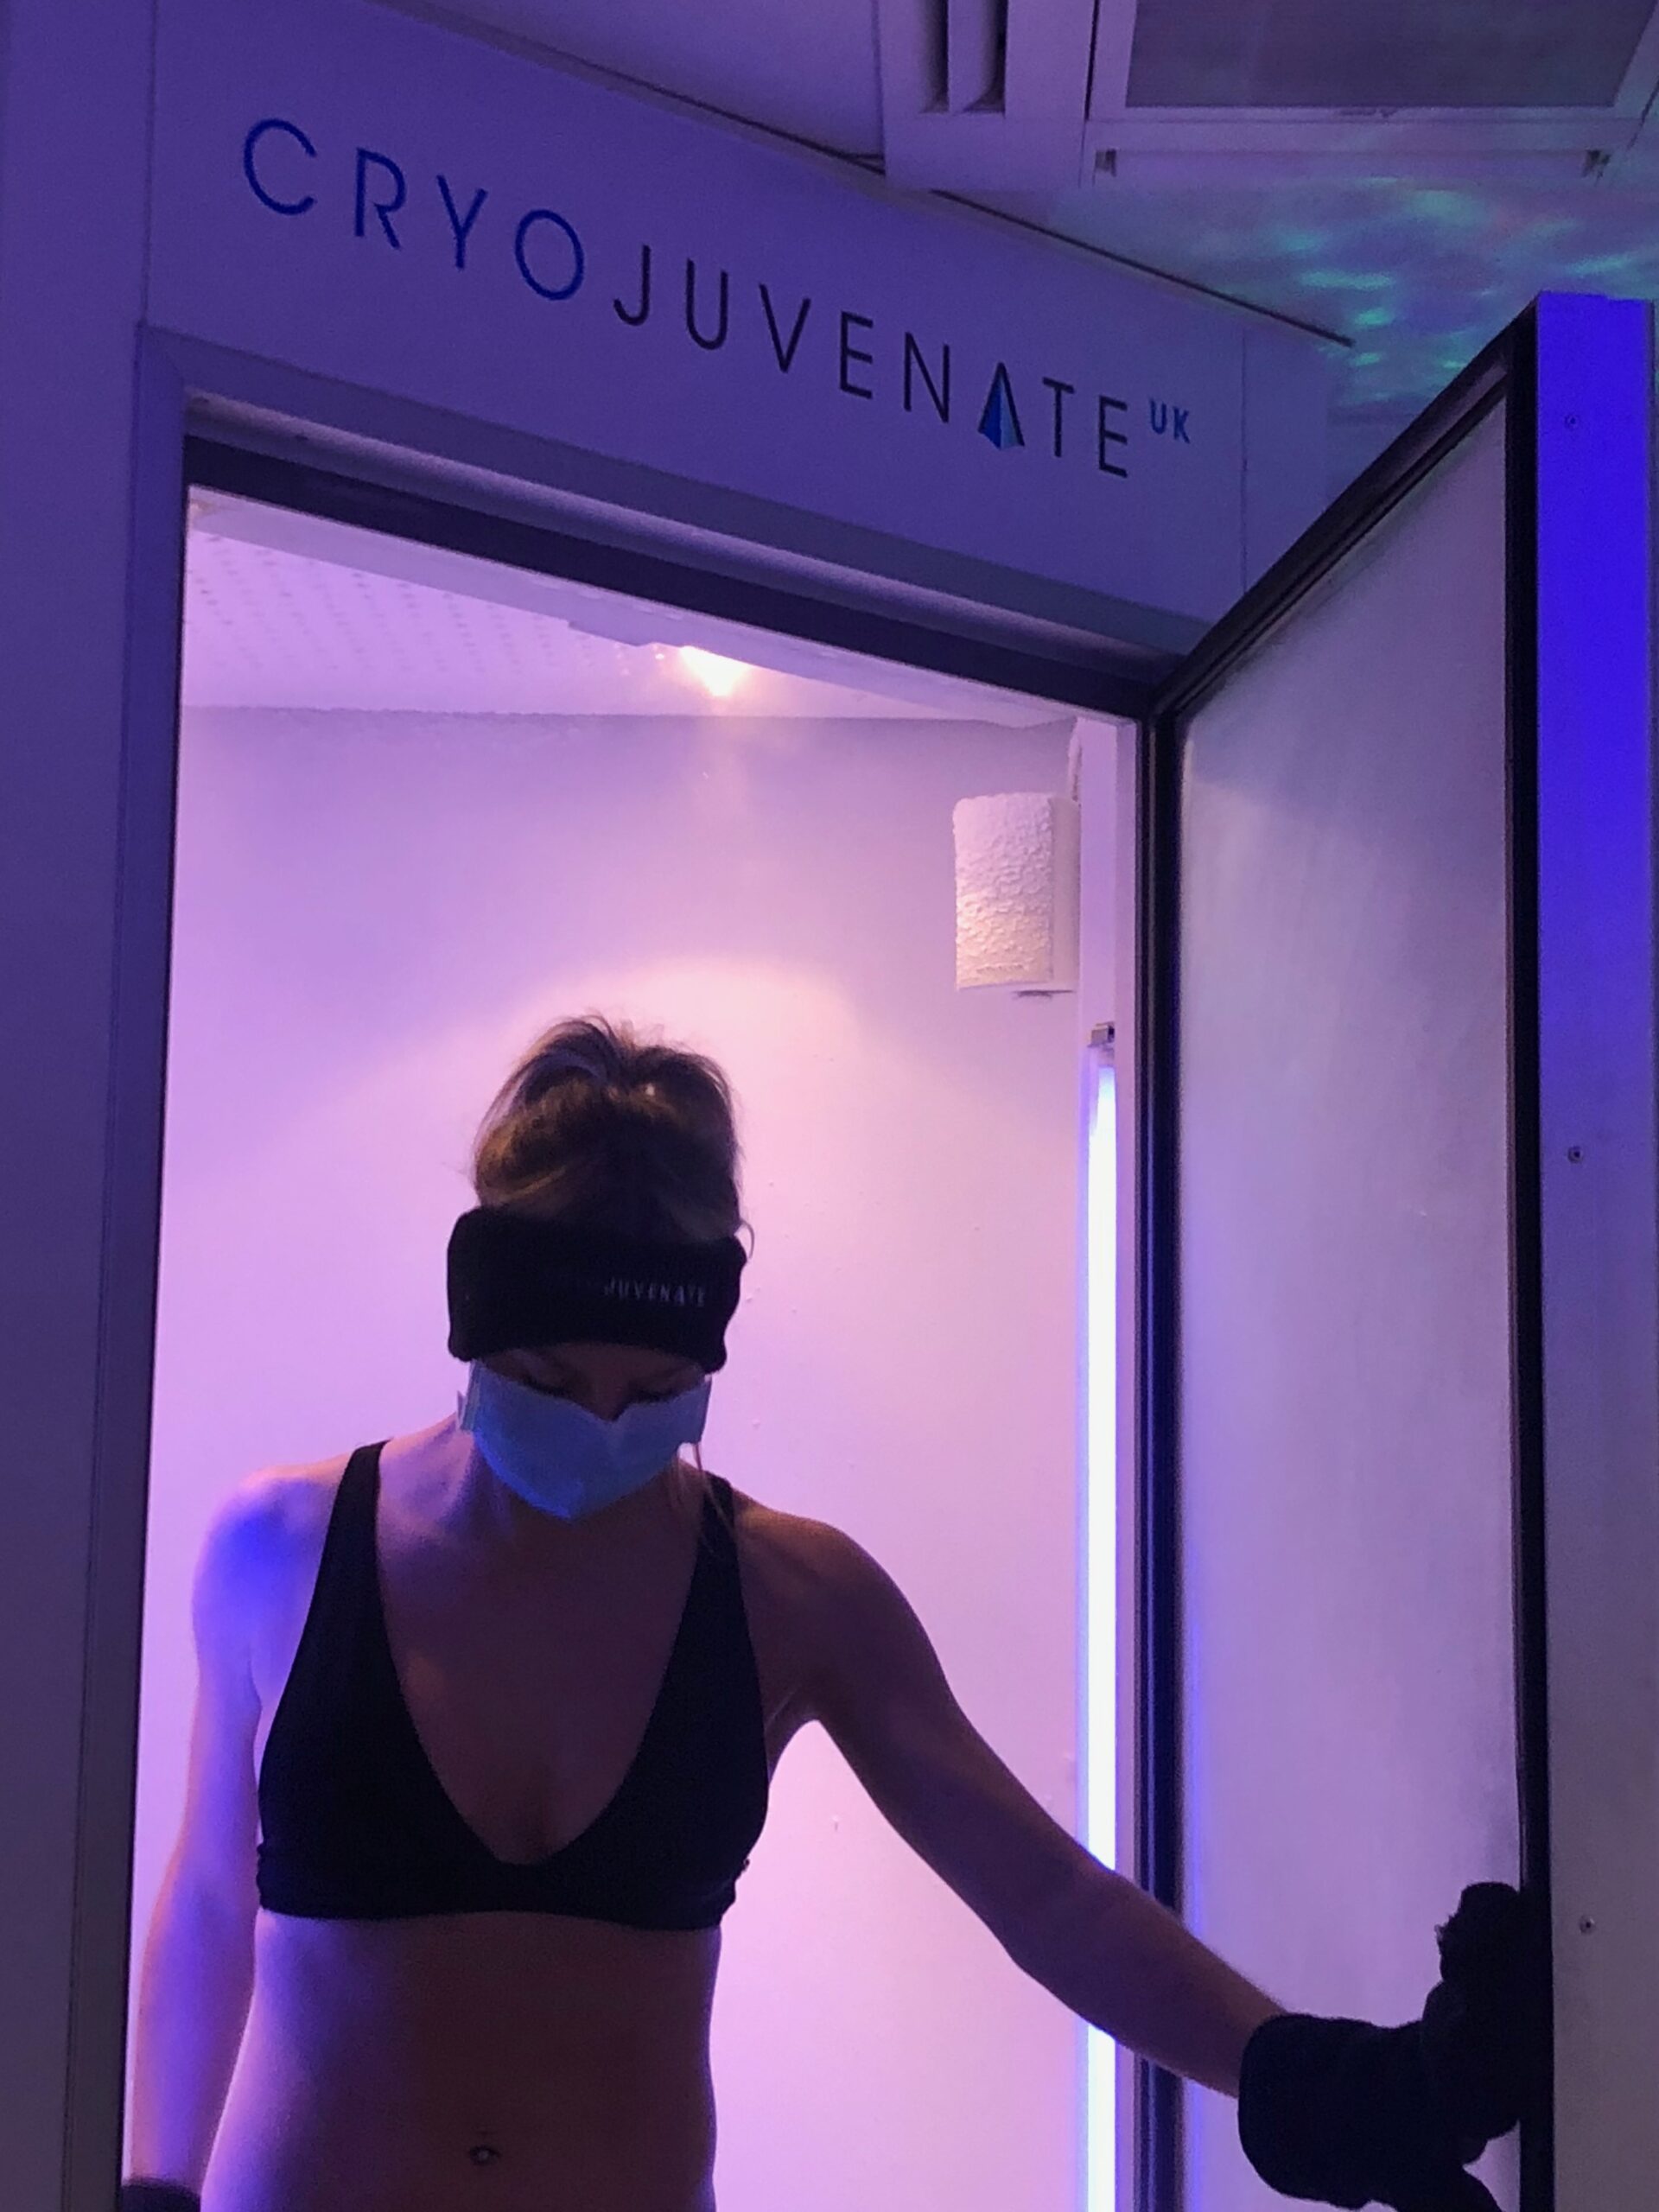 cryotherapy and sports injury clinic in sevenoaks kent